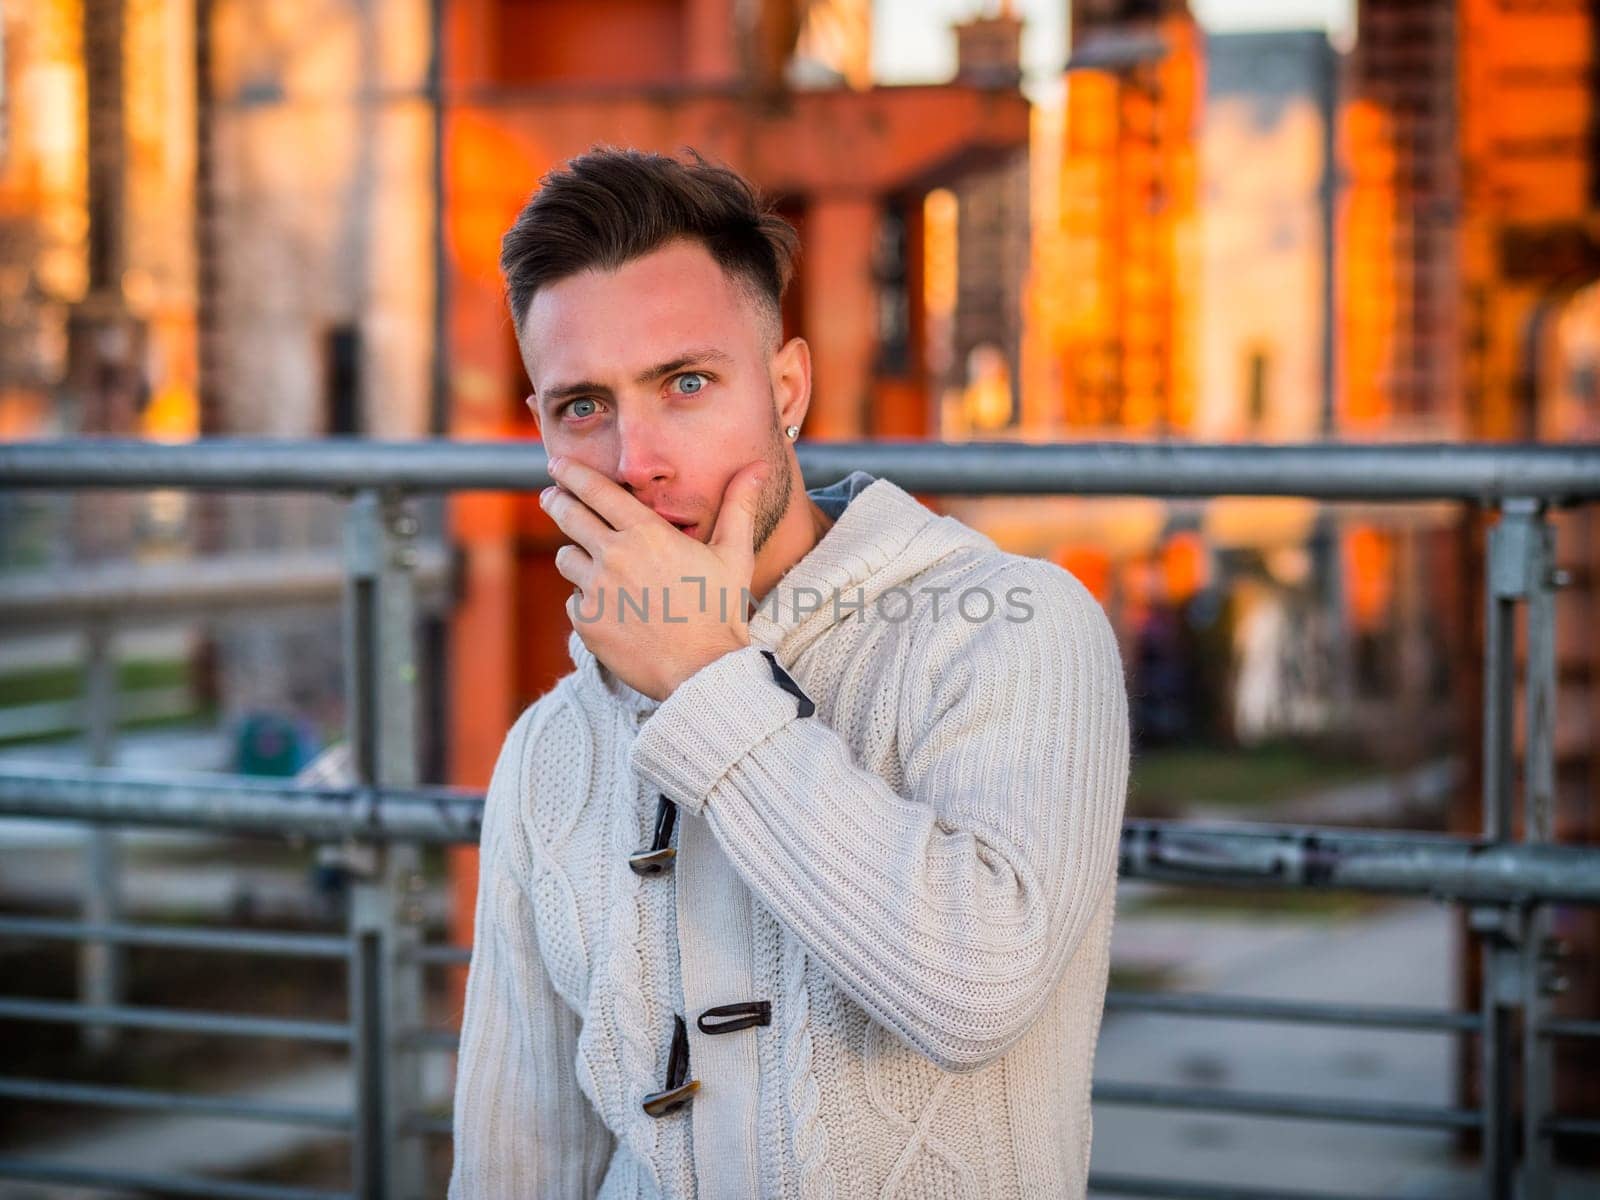 Photo of a man with piercing blue eyes standing in front of a metal fence, with a surprised, scared or worried expression on his face